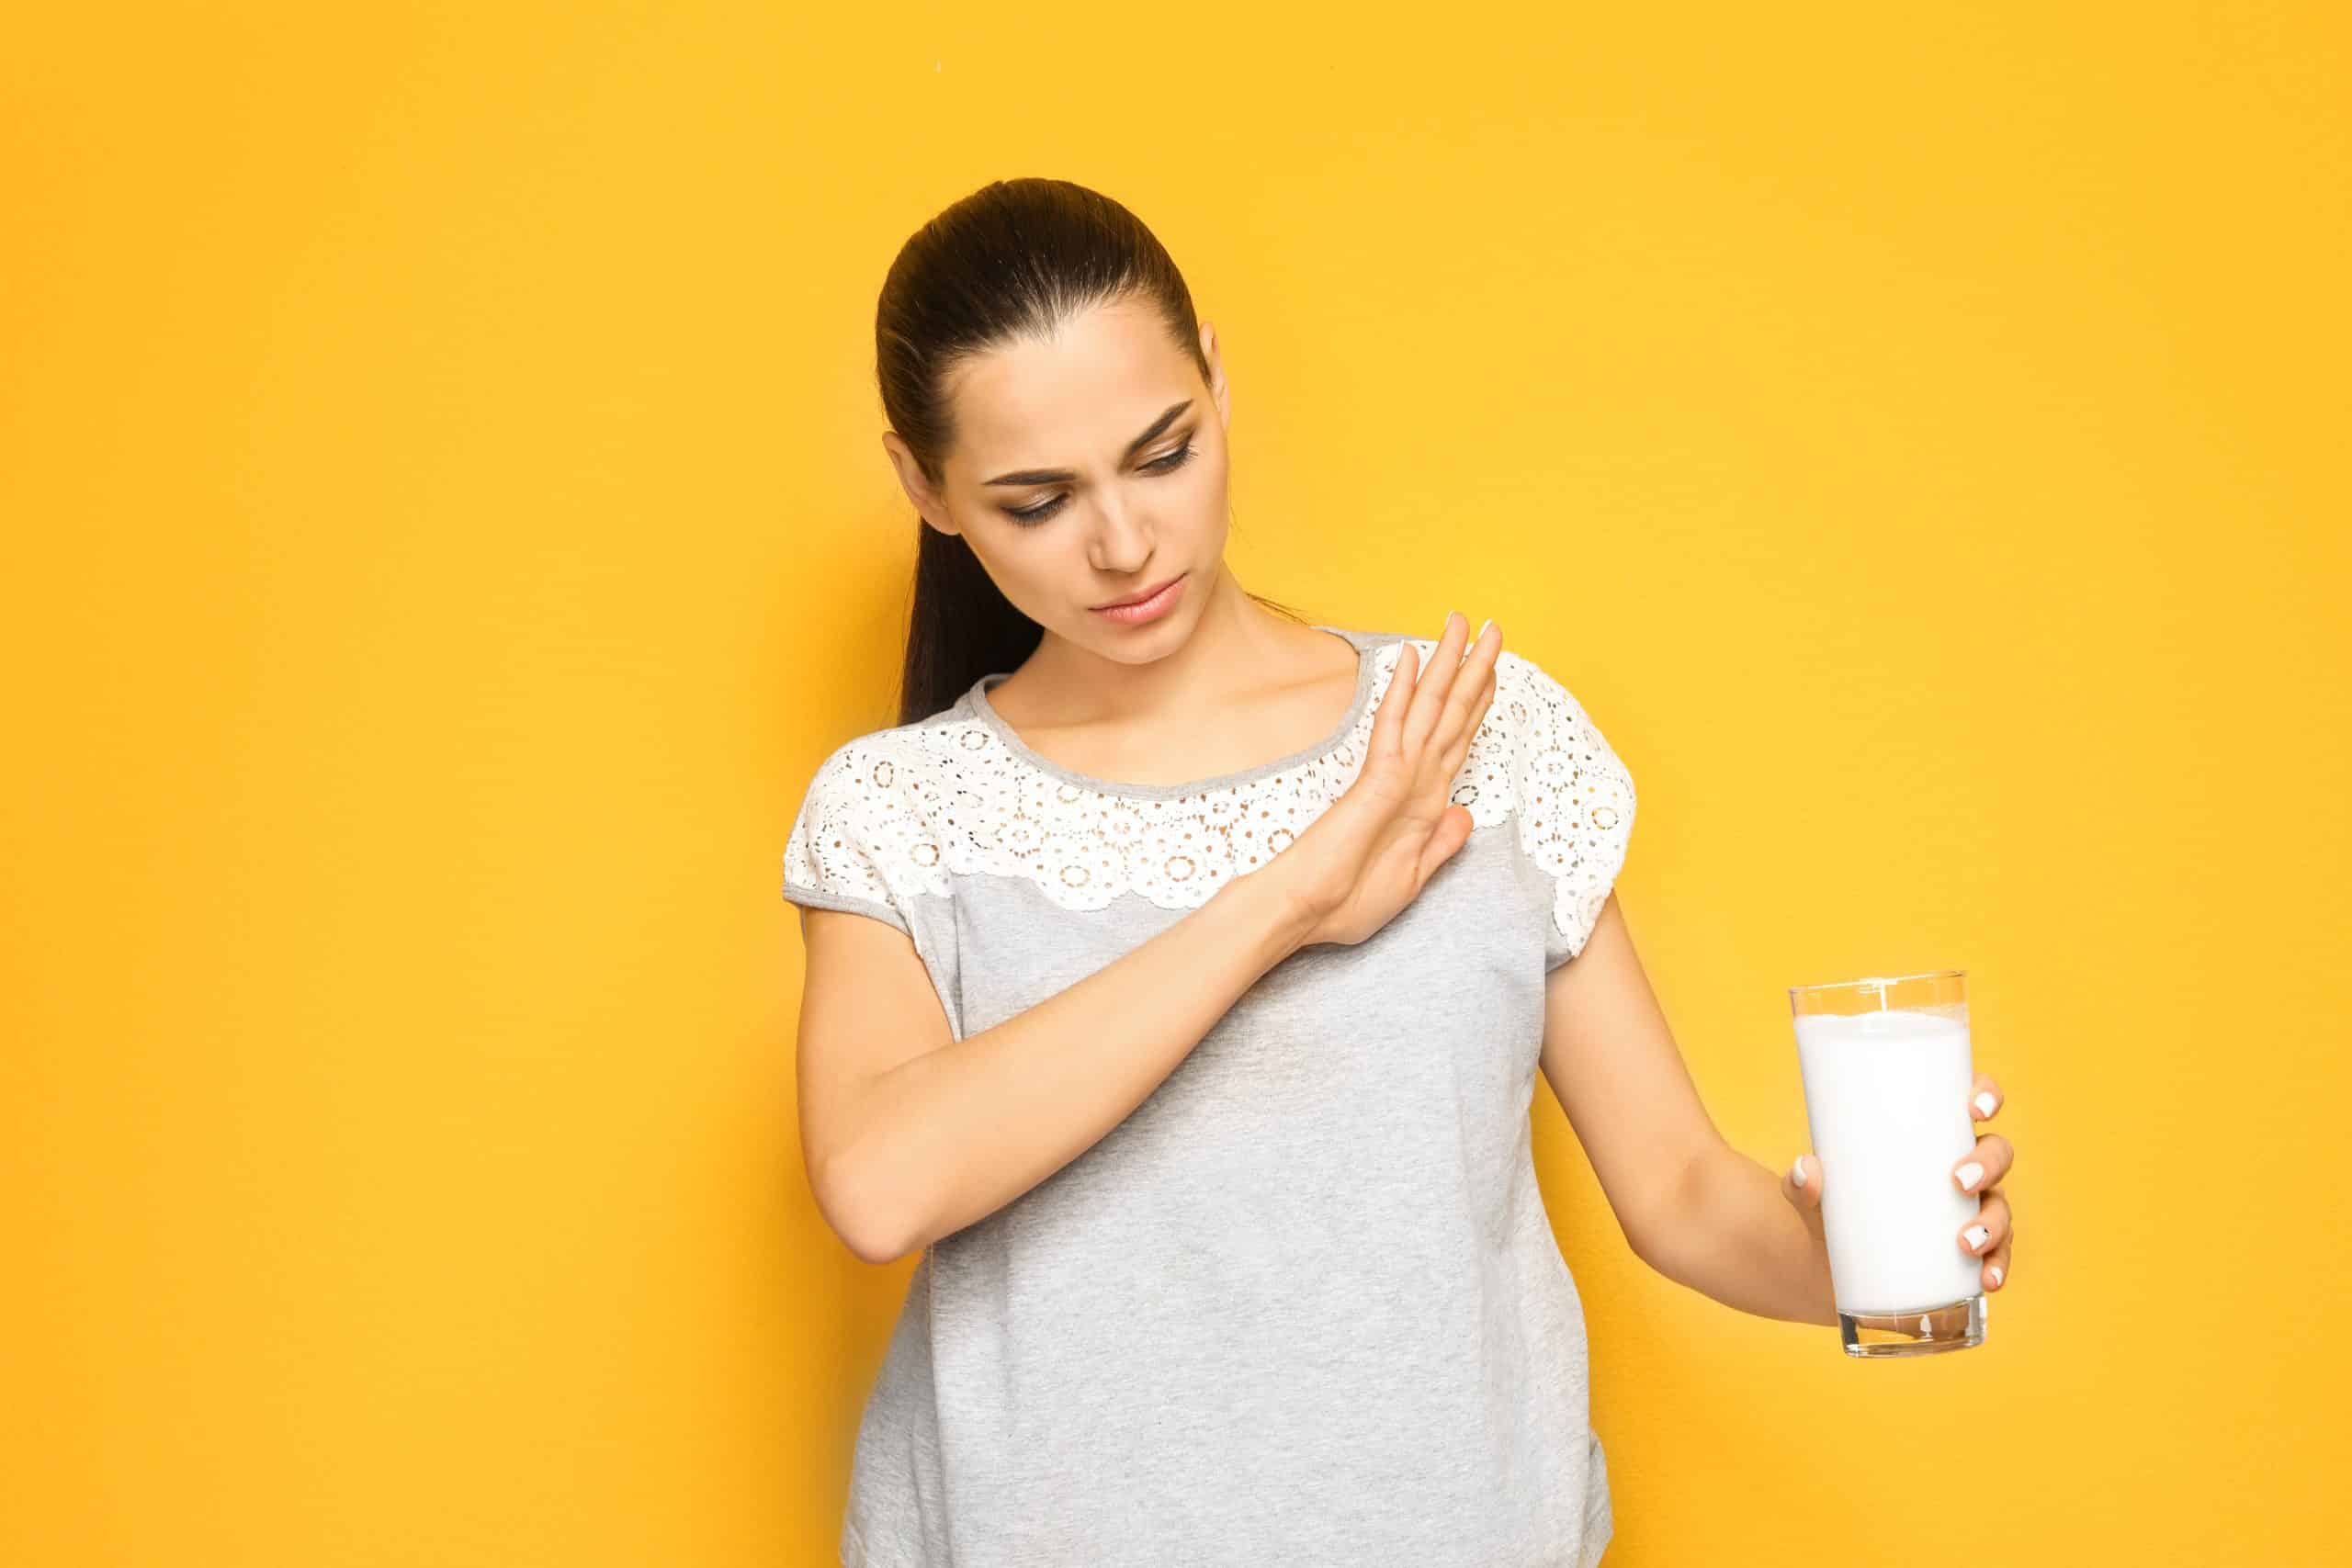 lactose intolerance weight loss